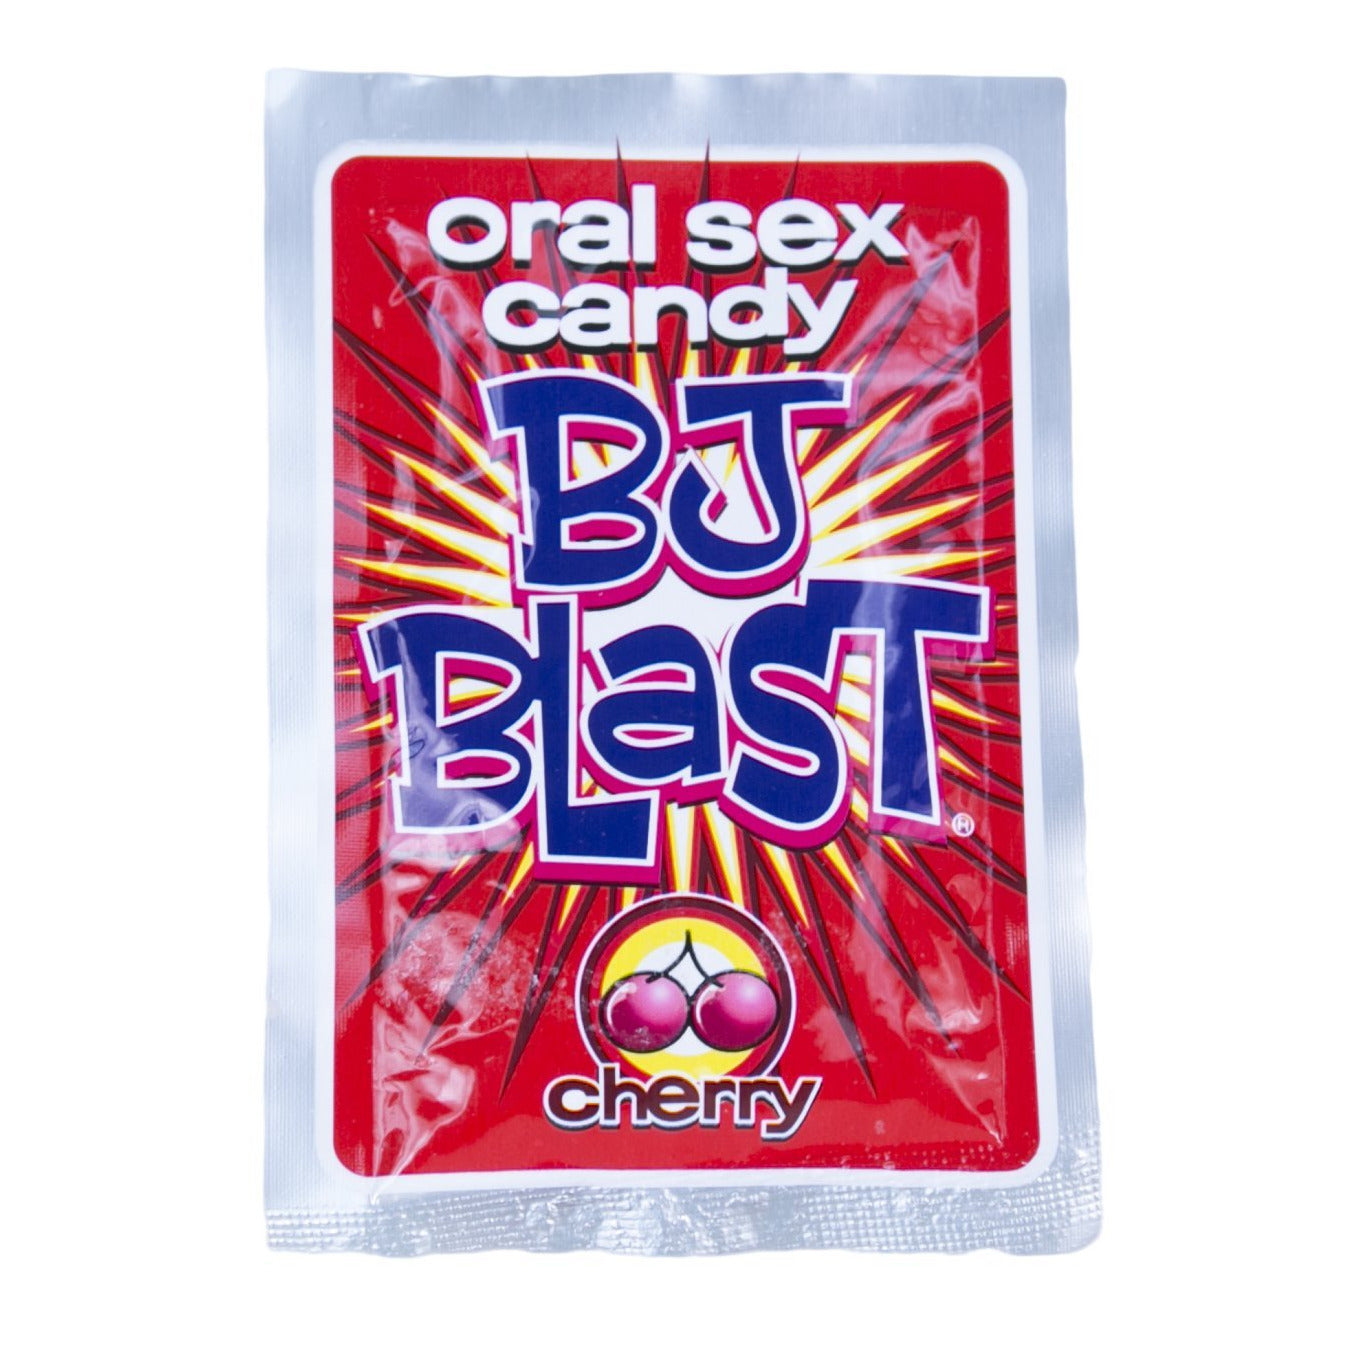 Pipedream Products Bj Blast Oral Sex Candy Display Bms Enterprises 4626